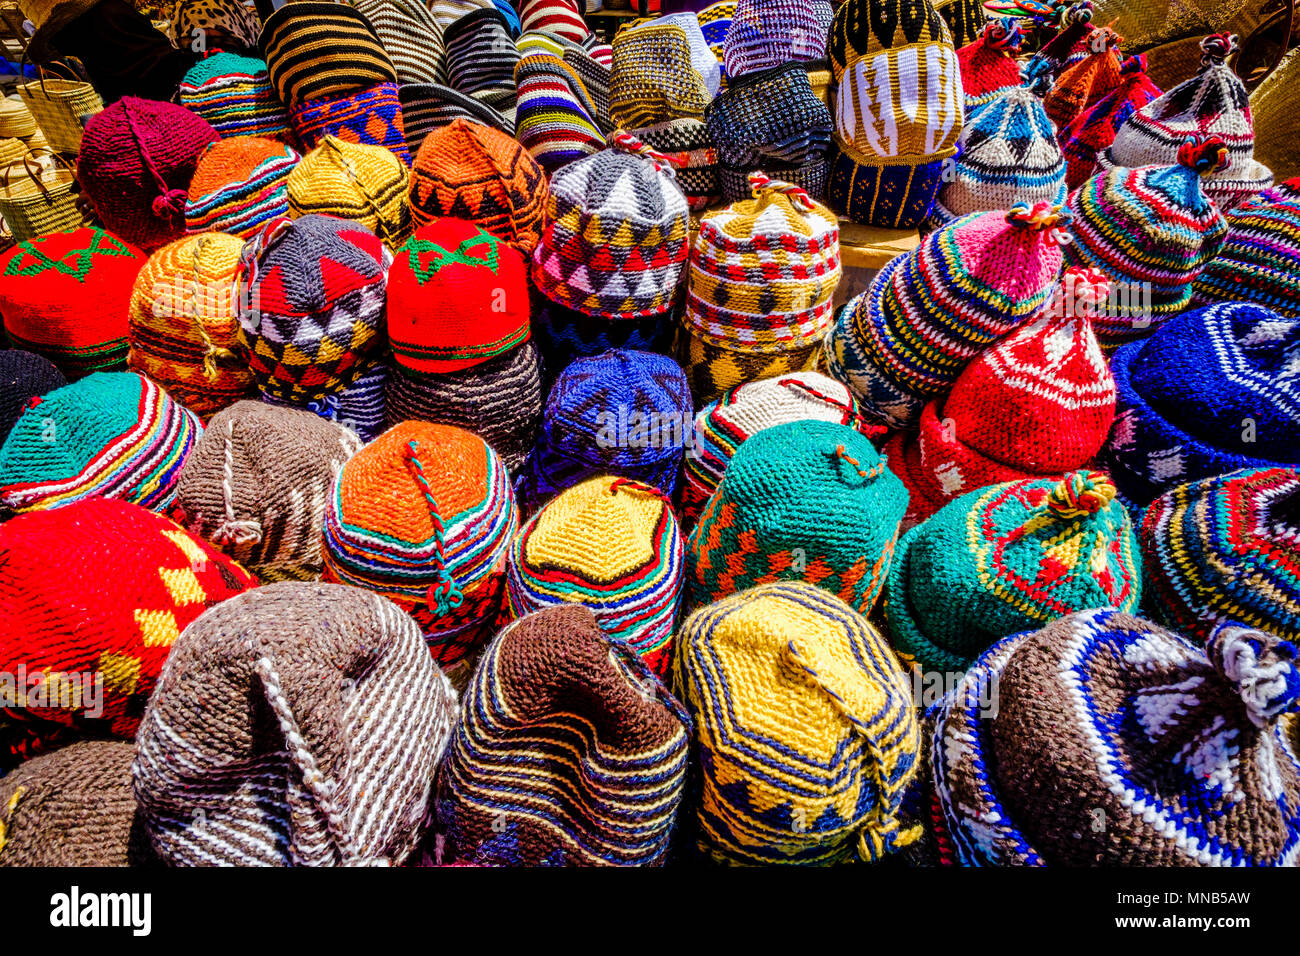 Hats for sale in the medina in Marrakech, North Africa Stock Photo